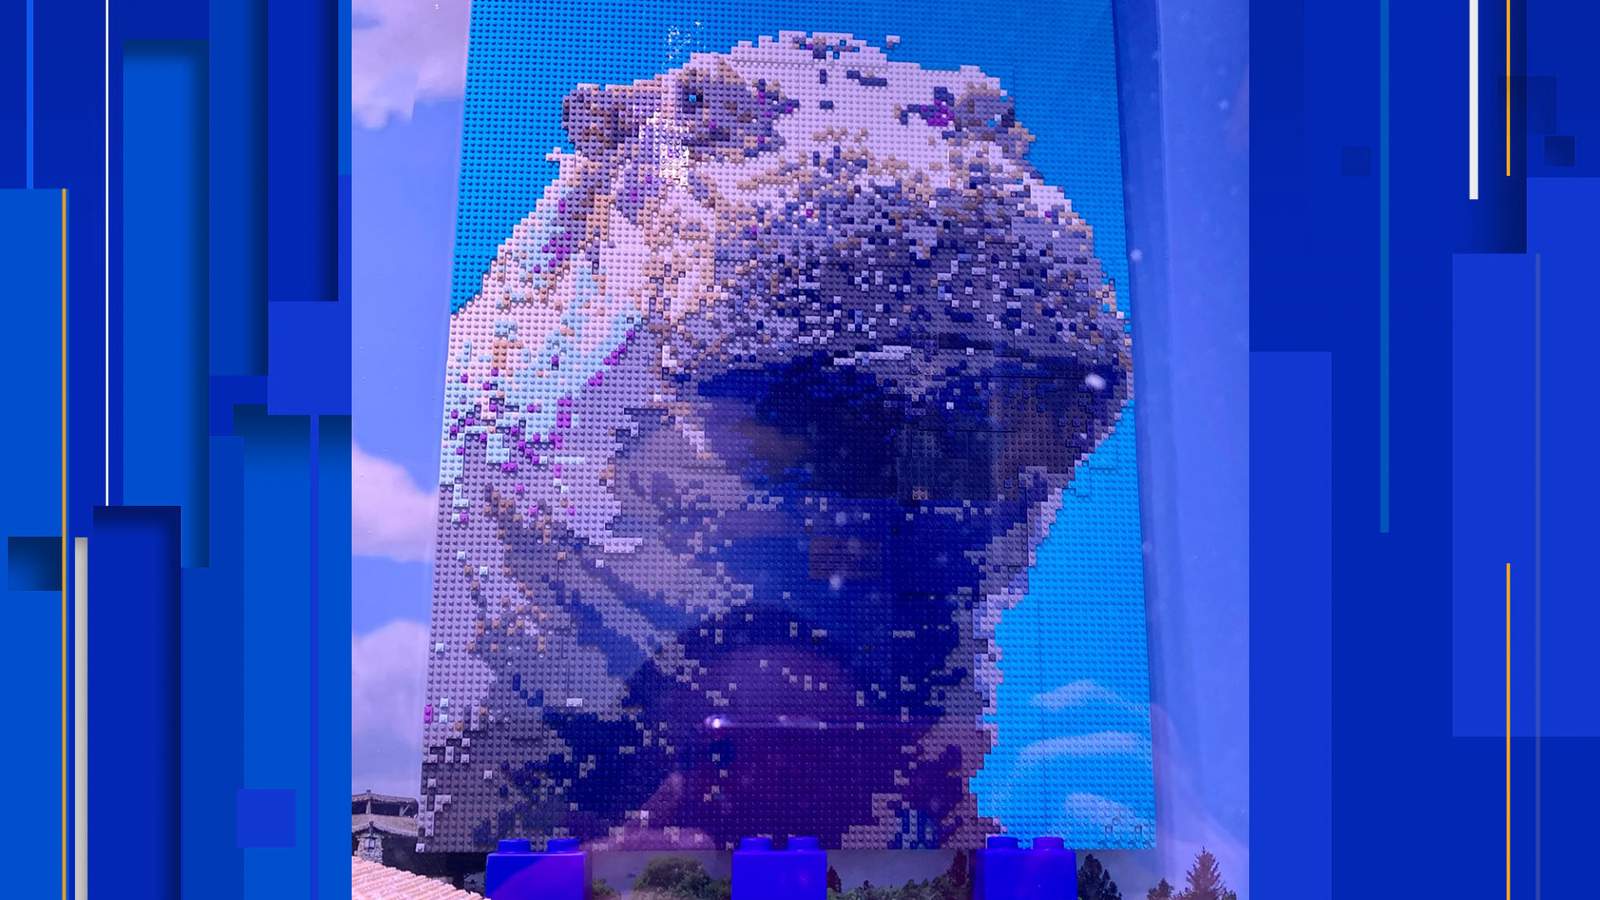 San Antonio’s most popular hippo officially has his own mural at LEGOLAND Discovery Center